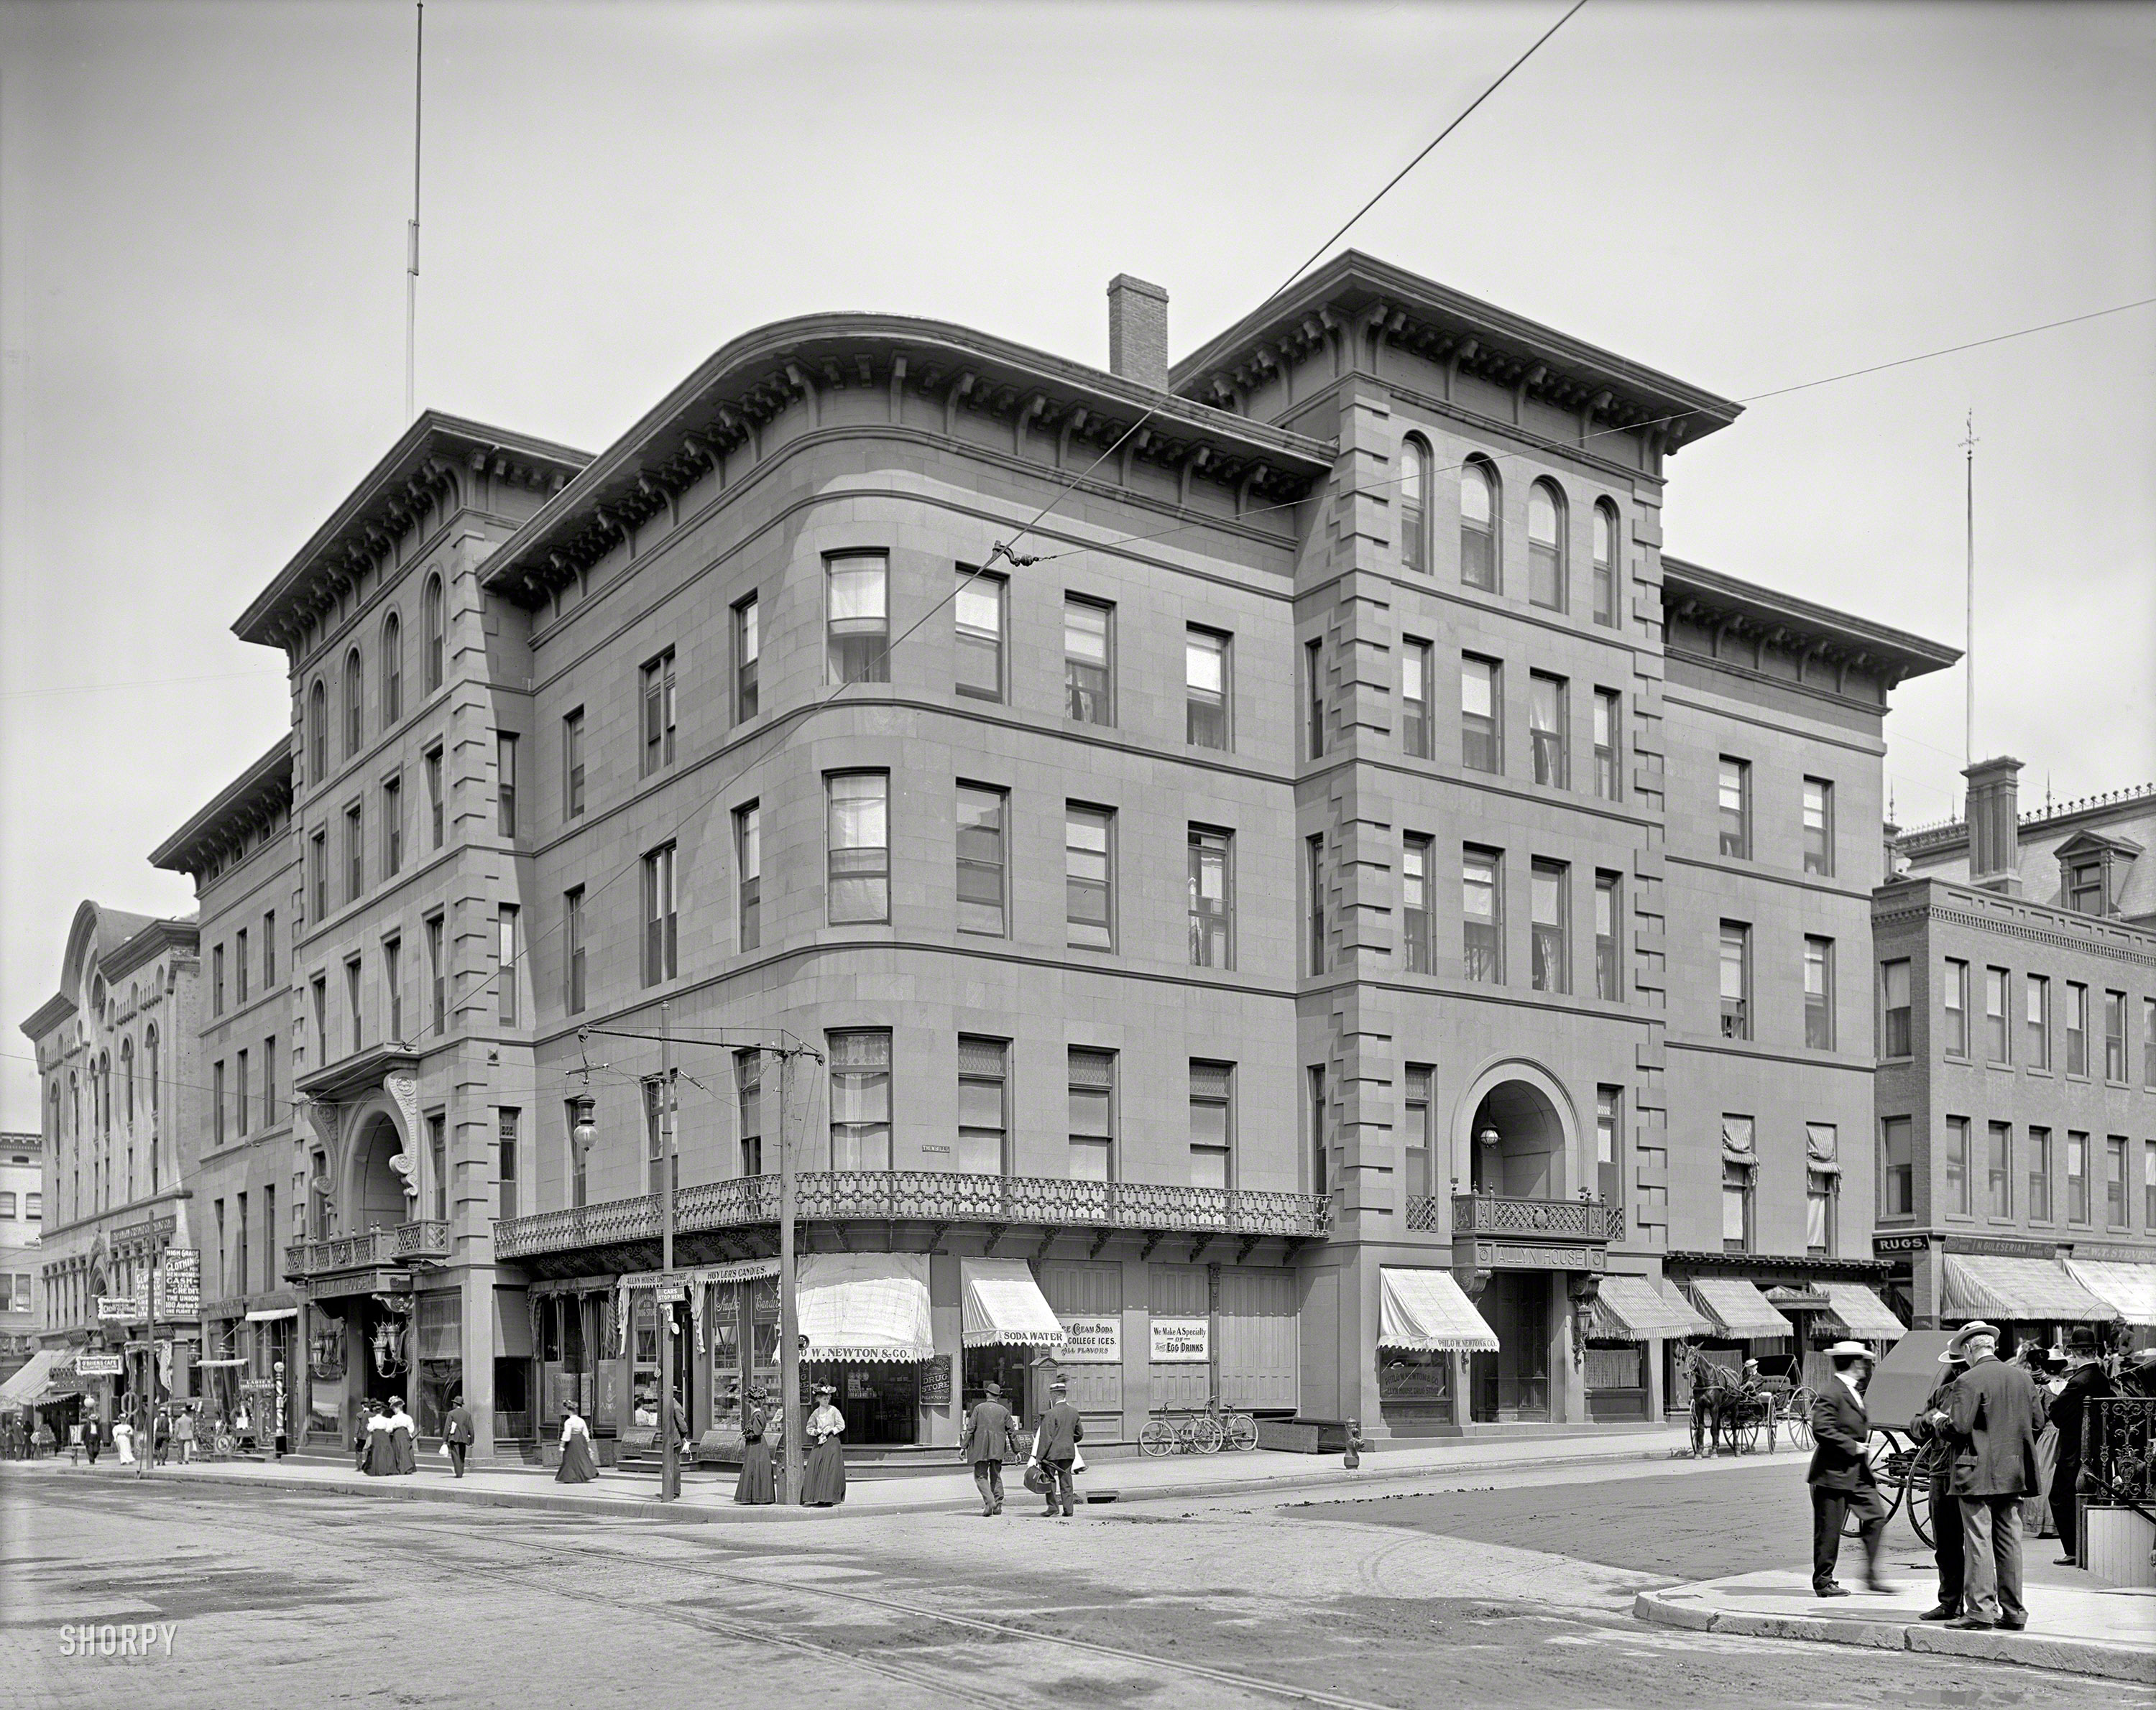 Circa 1908. "Allyn House, Hartford, Conn." At the drug store: Egg Drinks and "College Ices." 8x10 glass negative, Detroit Publishing Company. View full size.